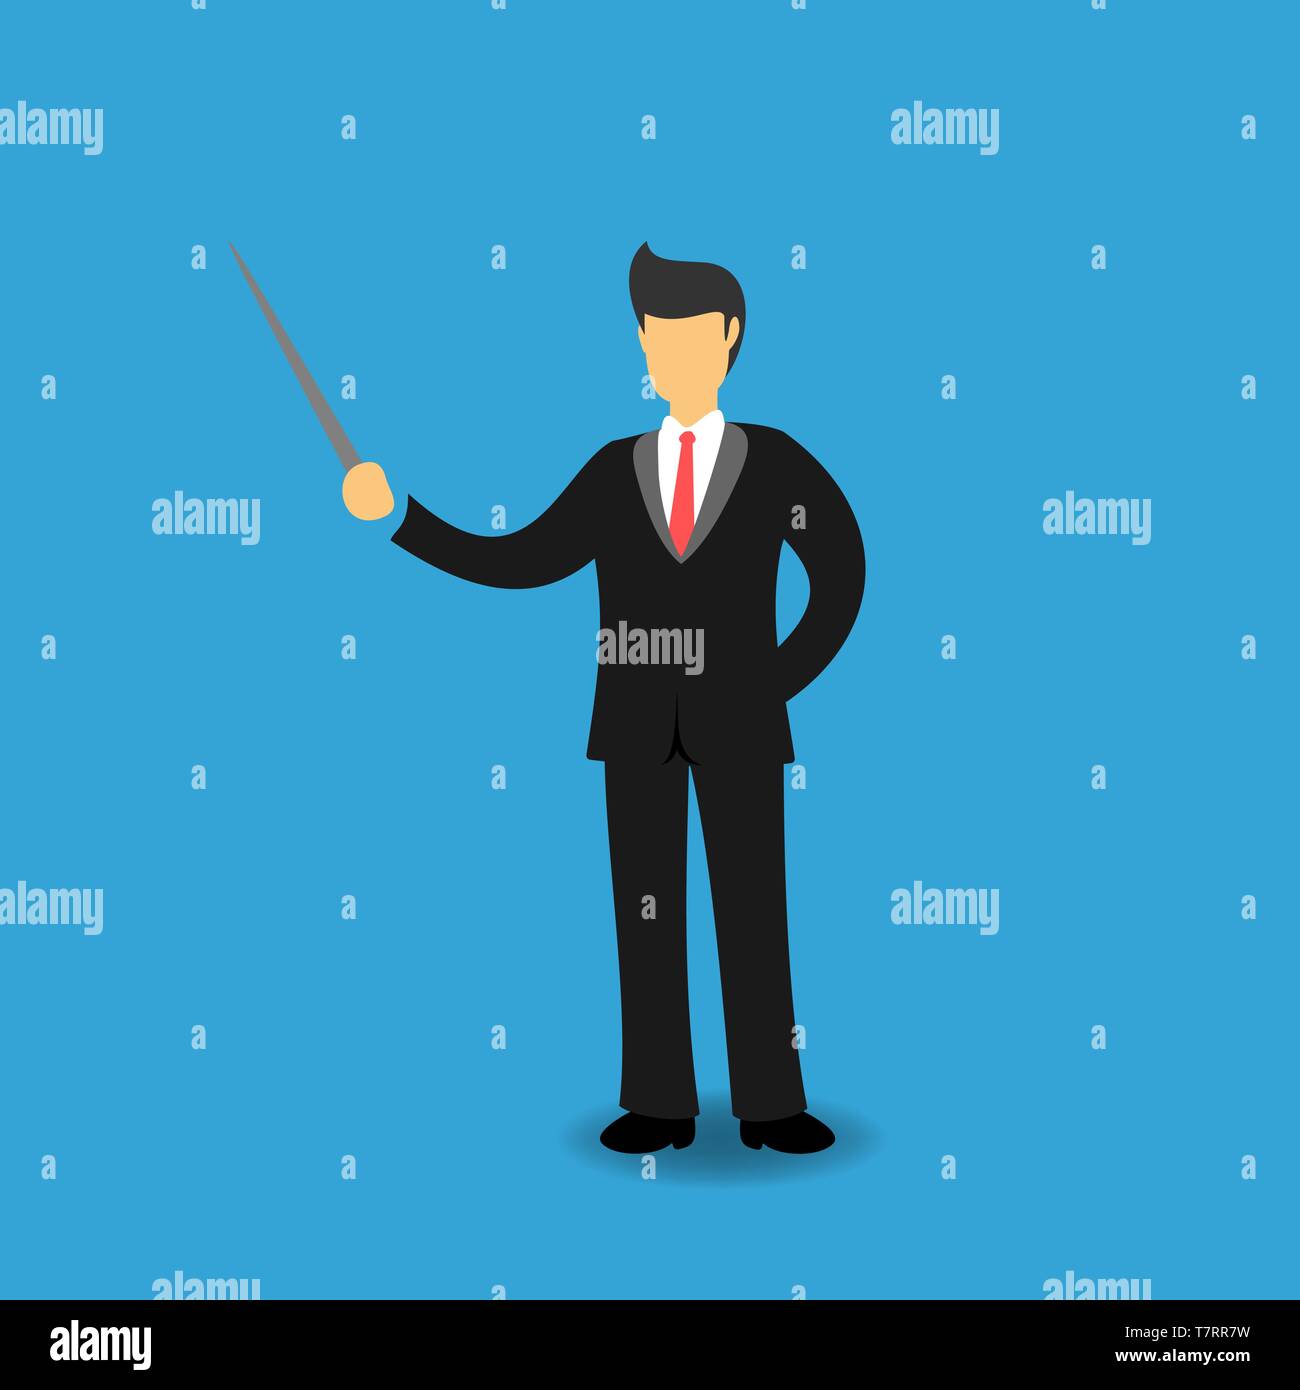 Concept of Businessman Presentating. Business People Clarifying & Explaining Something using a Stick. Flat Vector Illustration Stock Vector